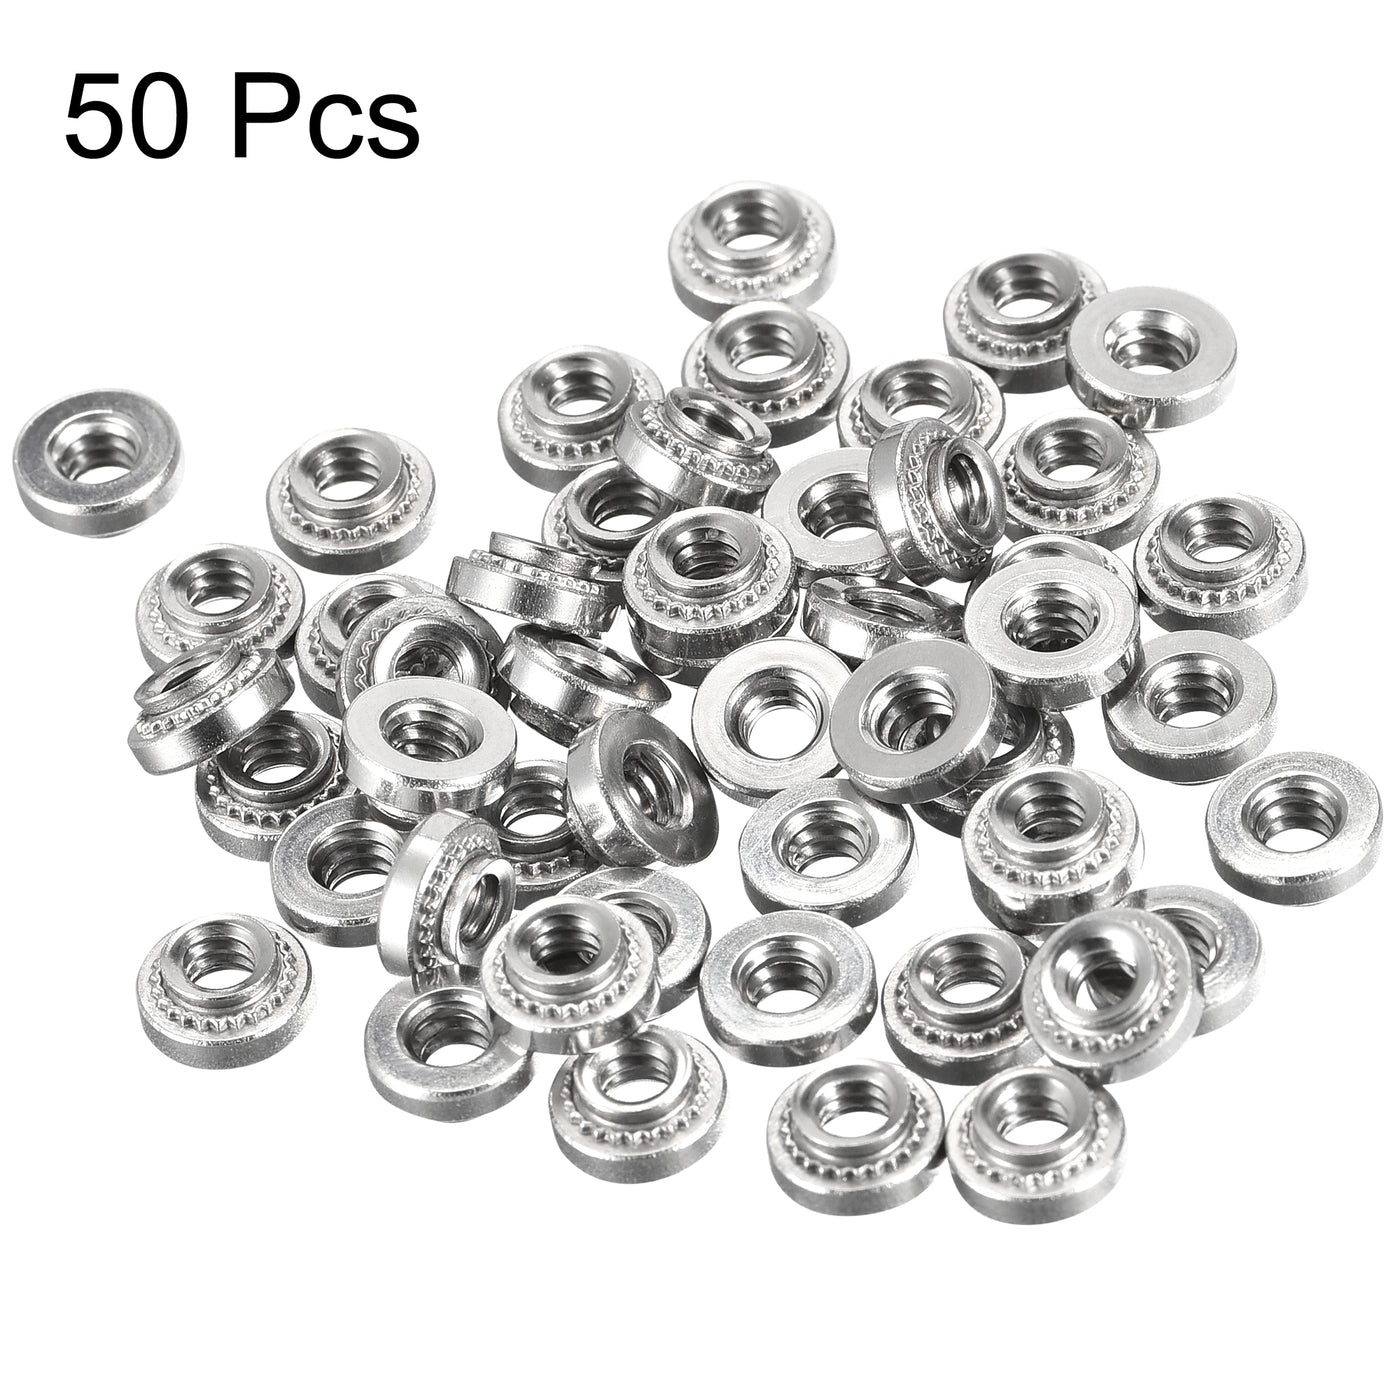 uxcell Uxcell Self -Clinching Nuts, Steel Rivet Nuts Fastener Hardware for Thin Sheet